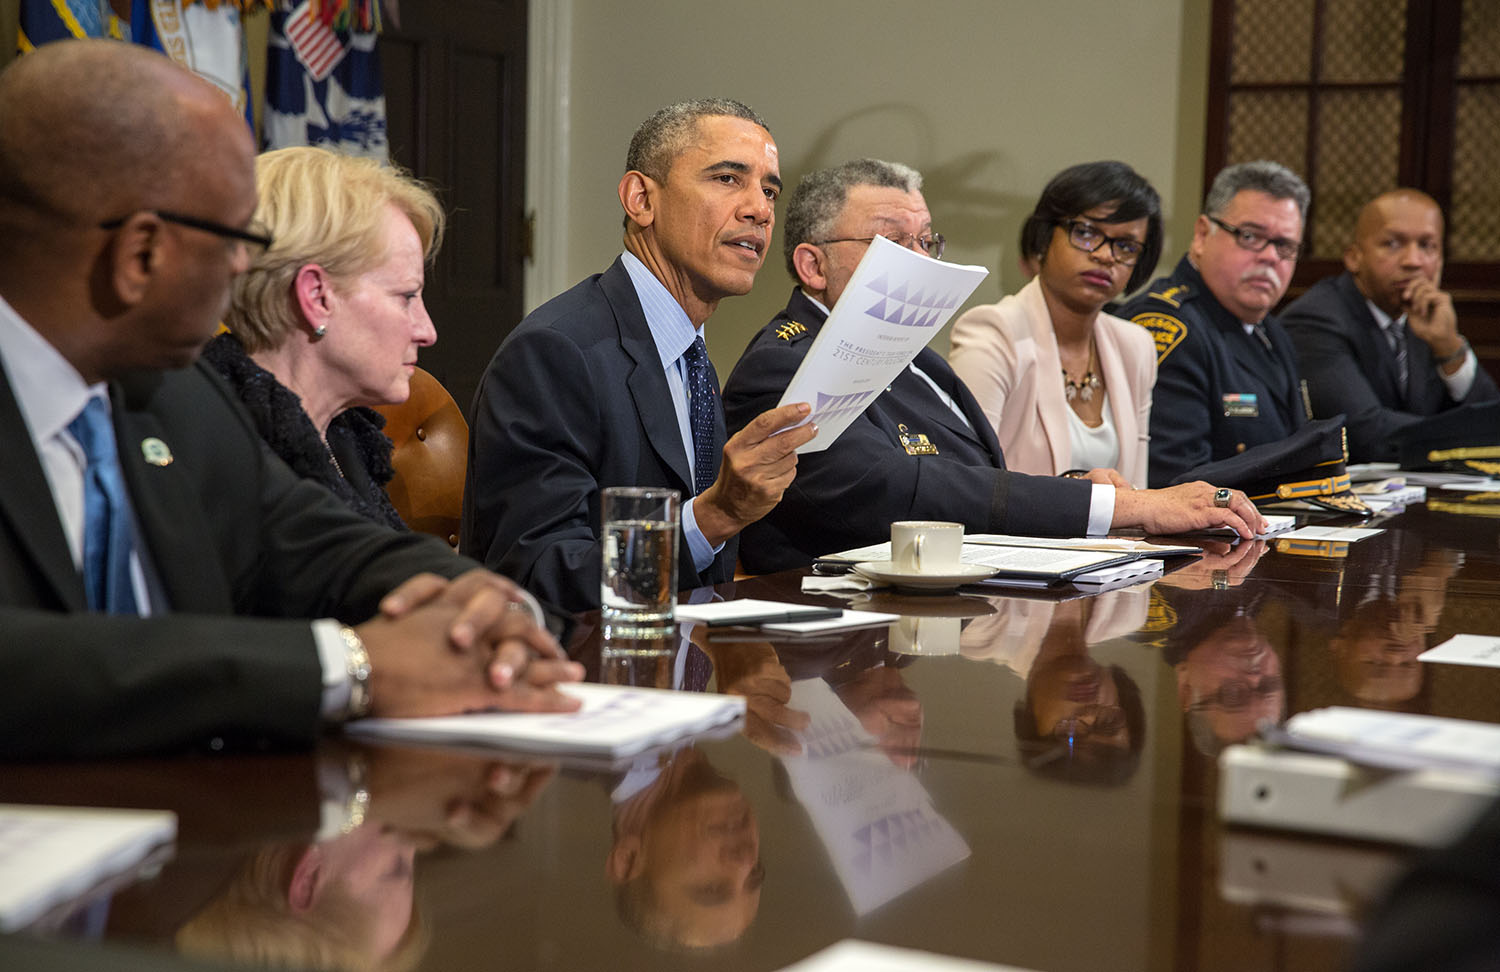 President Obama speaks to the press after a meeting with members of the Task Force on 21st Century Policing